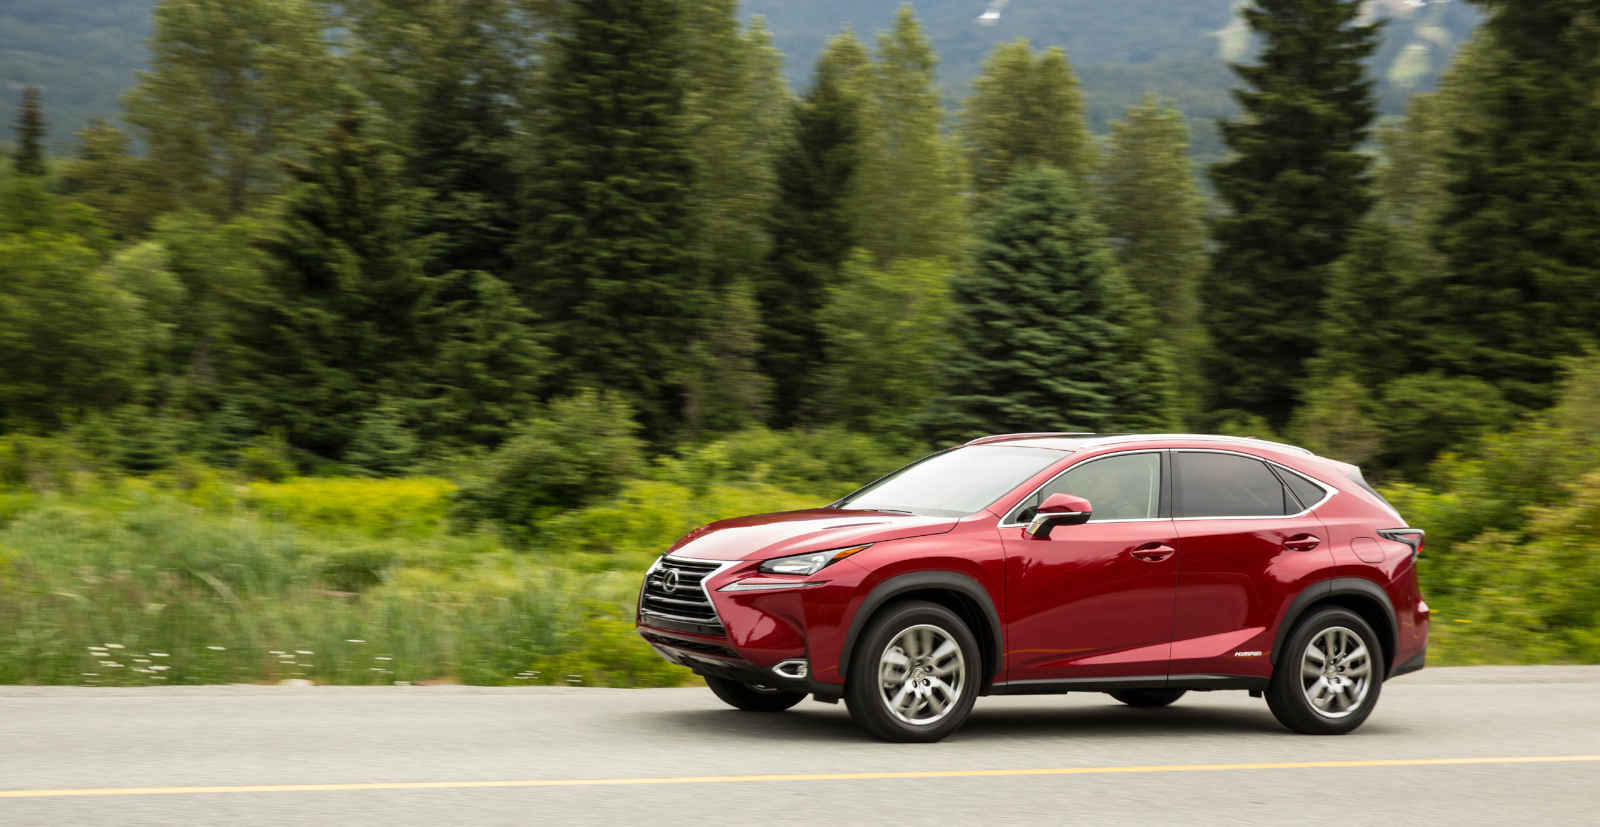 This Lexus is one of the most reliable SUVs with one recall